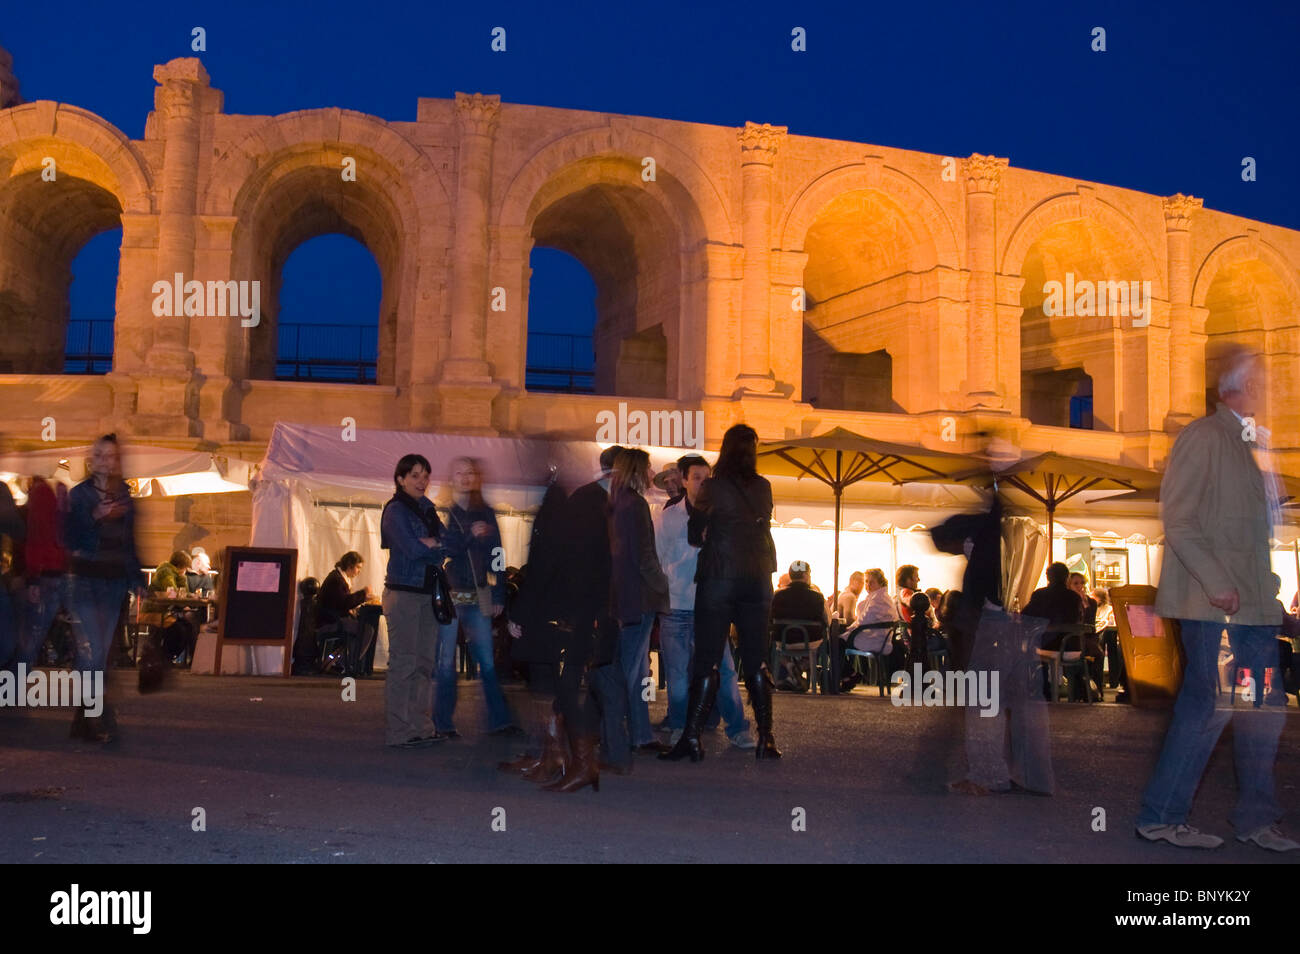 Arles, France, Large crowd People, Tourists, Outside Panoramic View of the Roman Arena, Lit up at Night Stock Photo